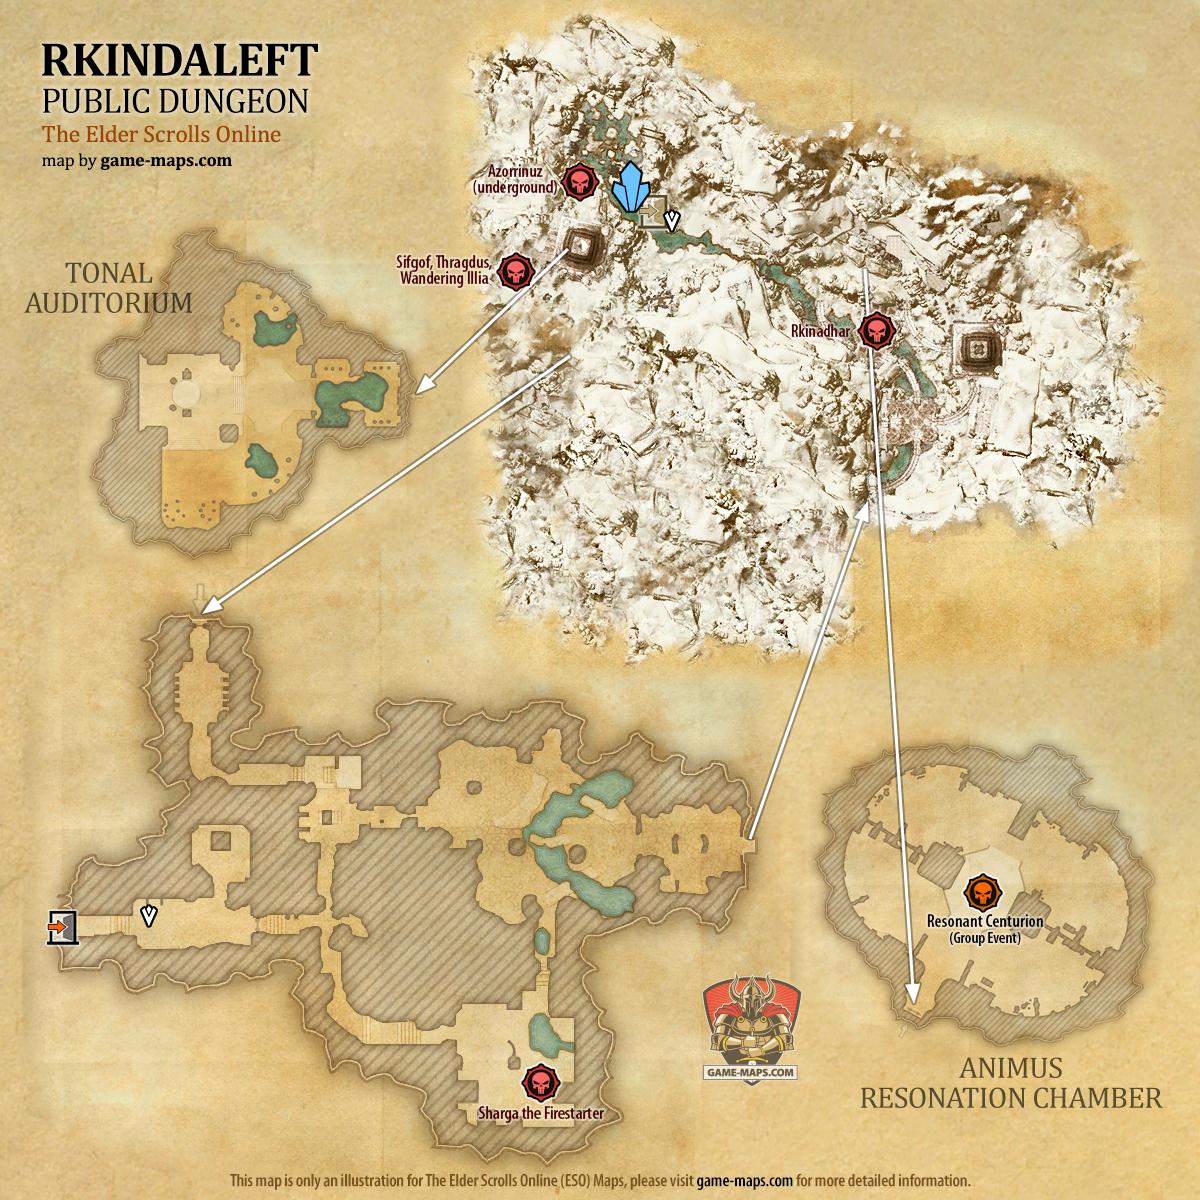 Map of Rkindaleft Public Dungeon located in Wrothgar ESO with Skyshard and Bosses.